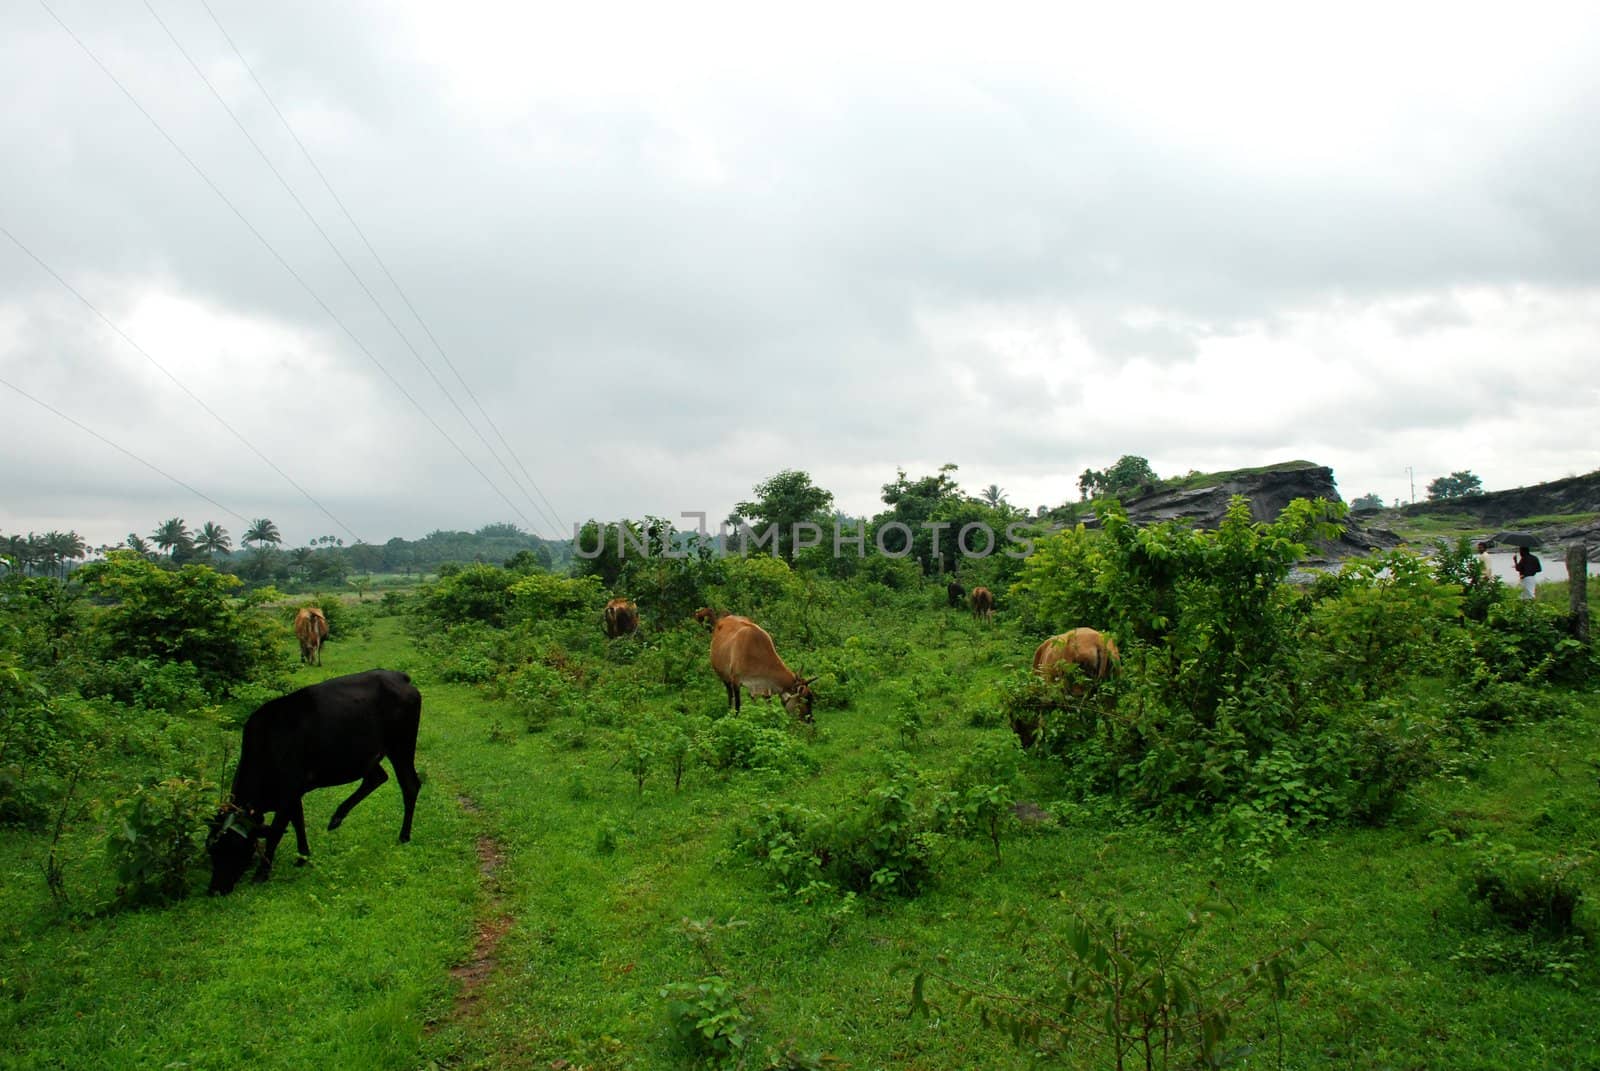 countryside cows are in the fied in an indian village